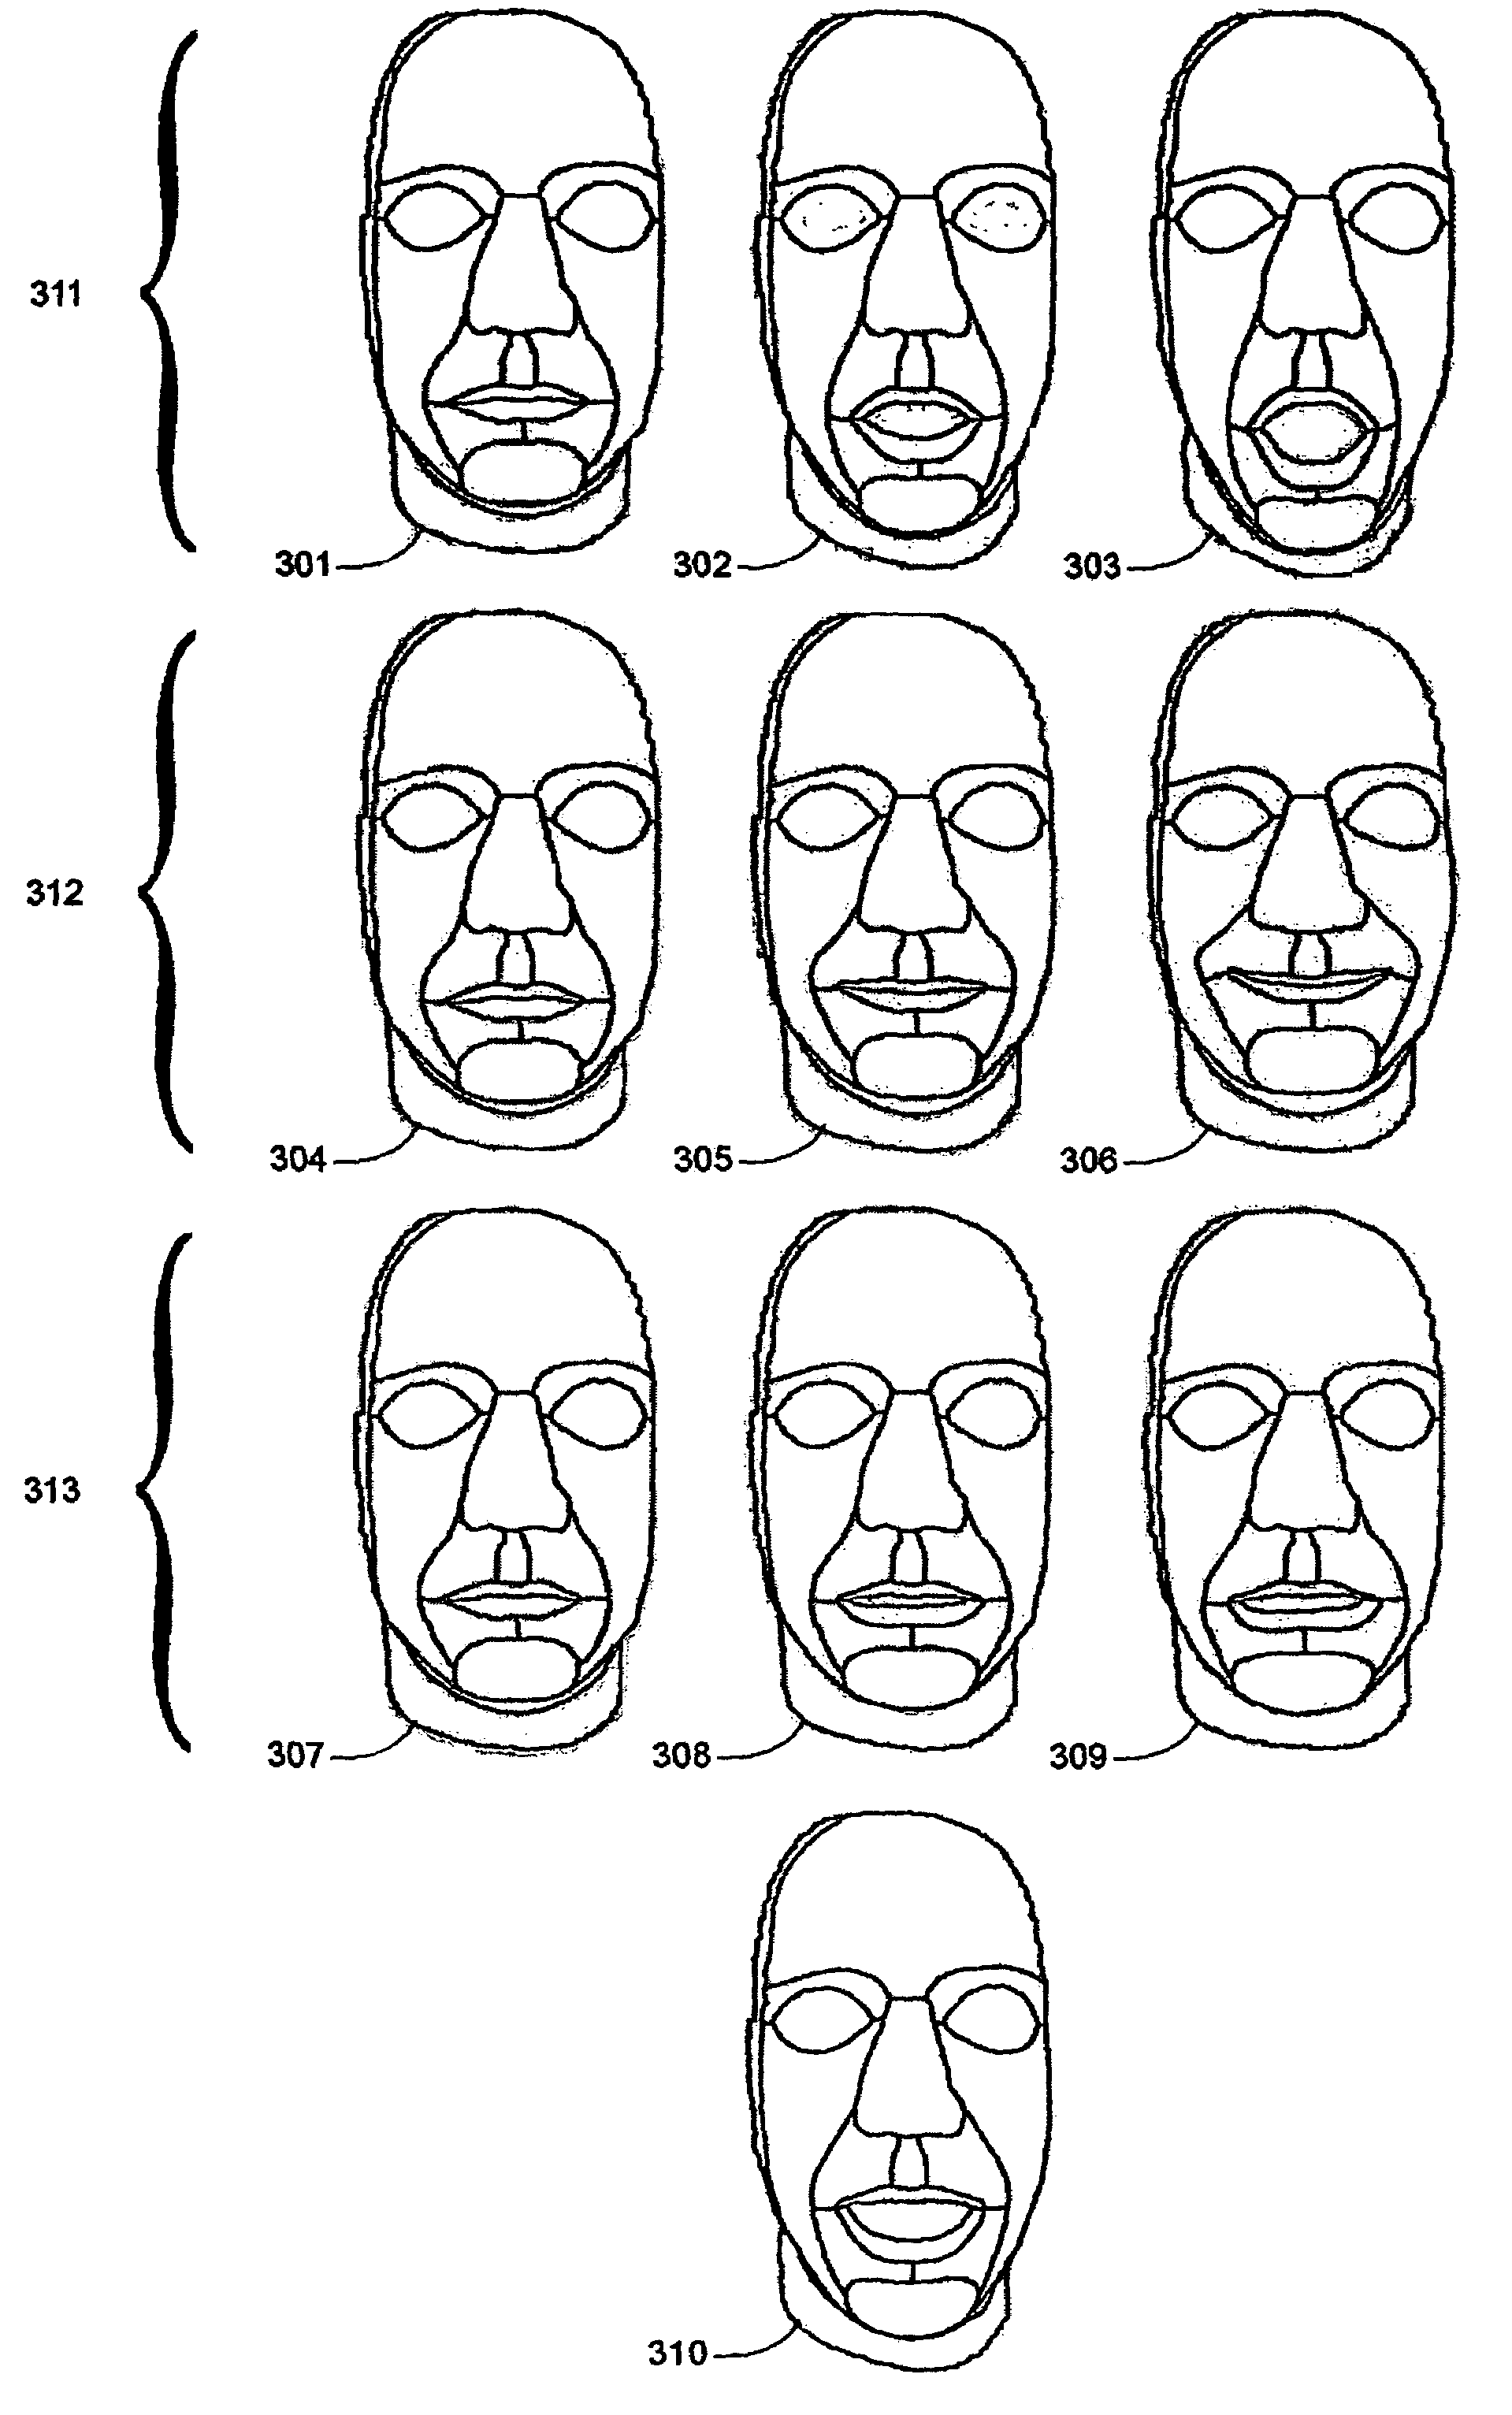 Static and dynamic 3-D human face reconstruction